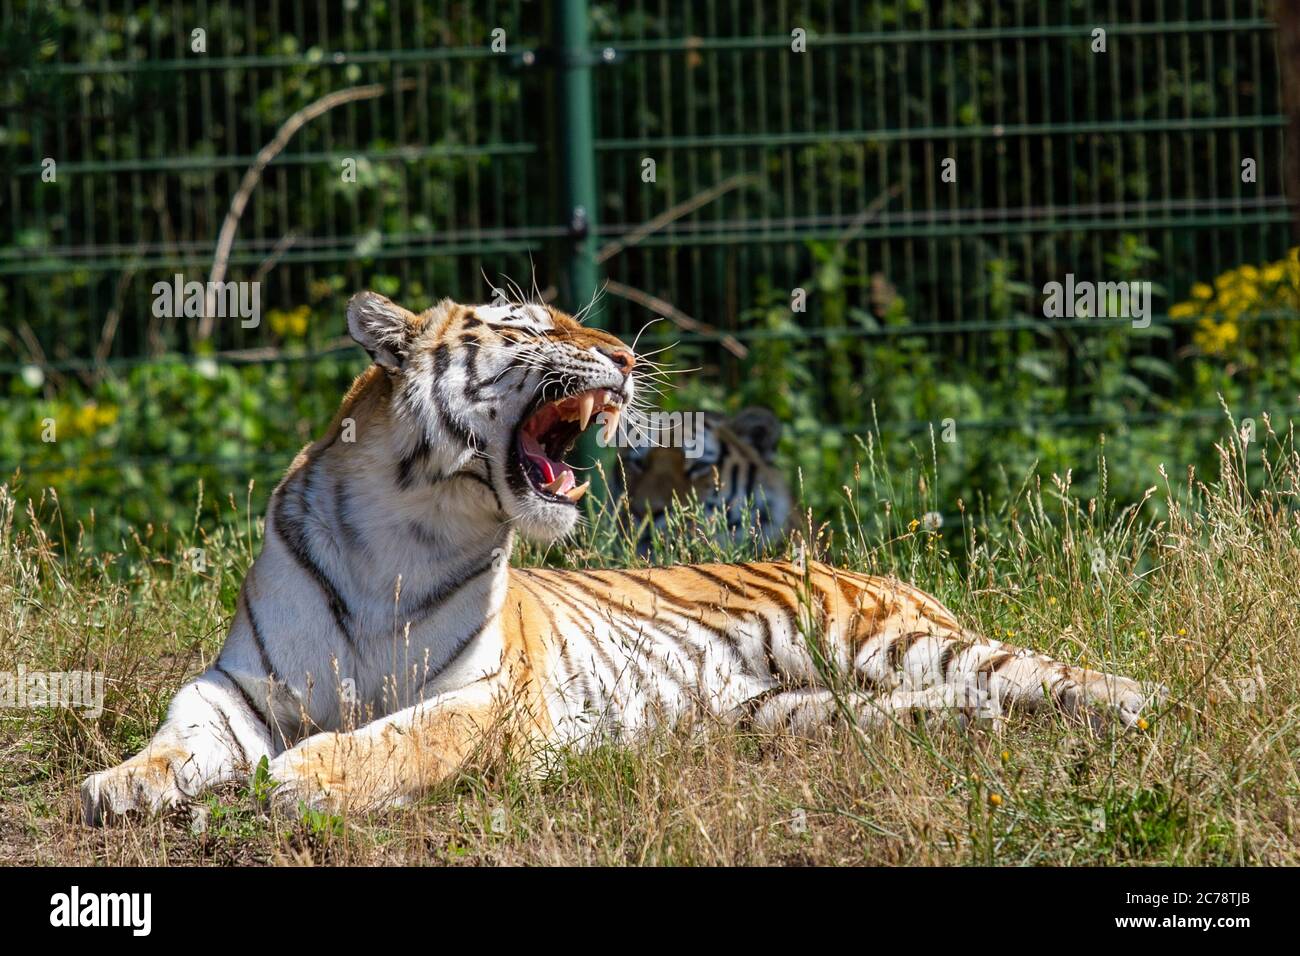 The Tiger is a species of carnivorous mammal from the feline family.  Safaripark Beekse Bergen is the largest animal zoo in the Benelux and is  home to Stock Photo - Alamy